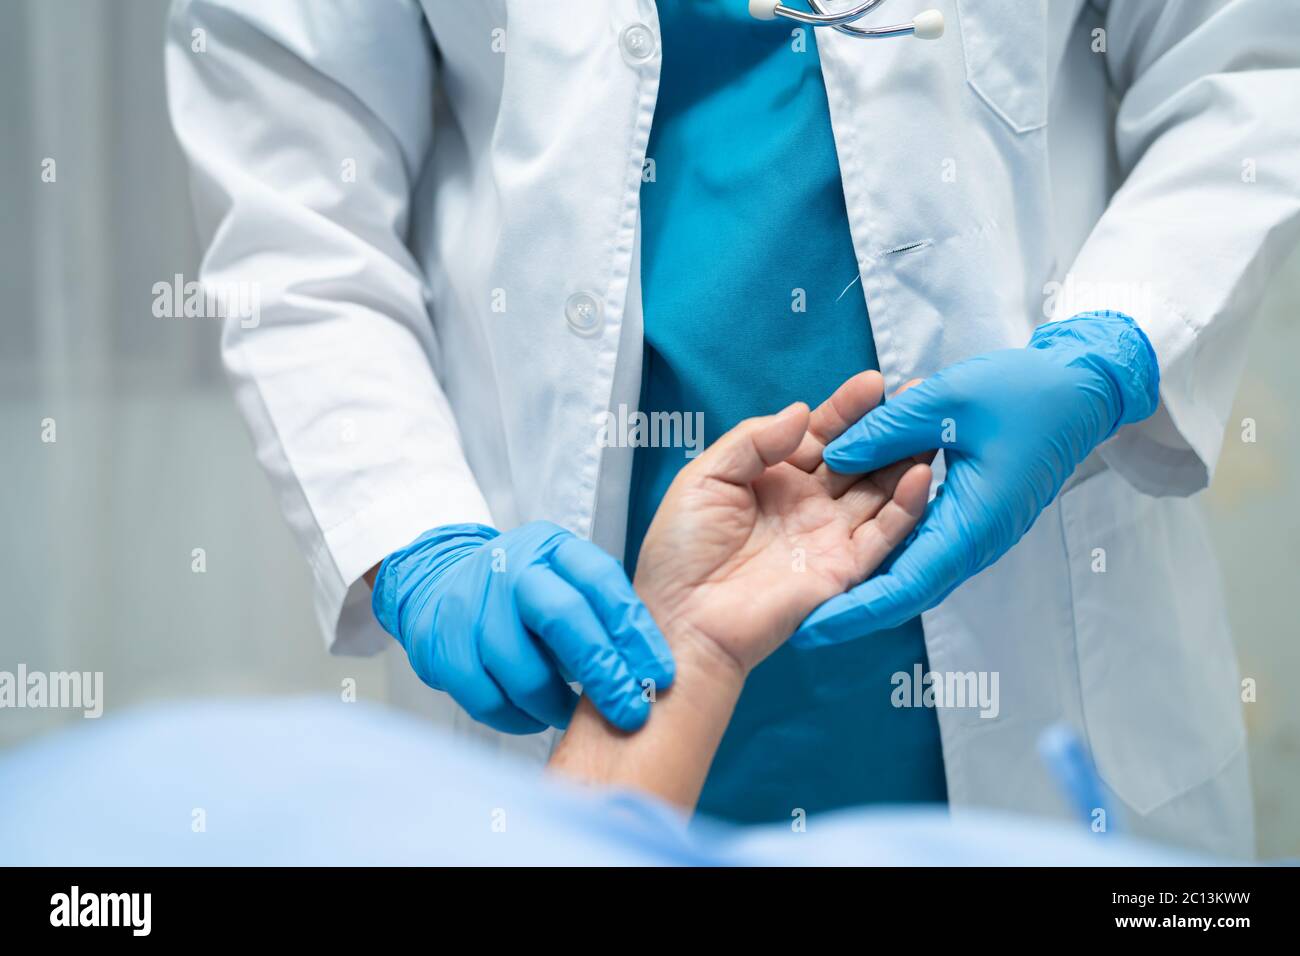 https://c8.alamy.com/comp/2C13KWW/doctor-catch-the-pulse-with-patient-in-nursing-hospital-ward-healthy-strong-medical-concept-2C13KWW.jpg